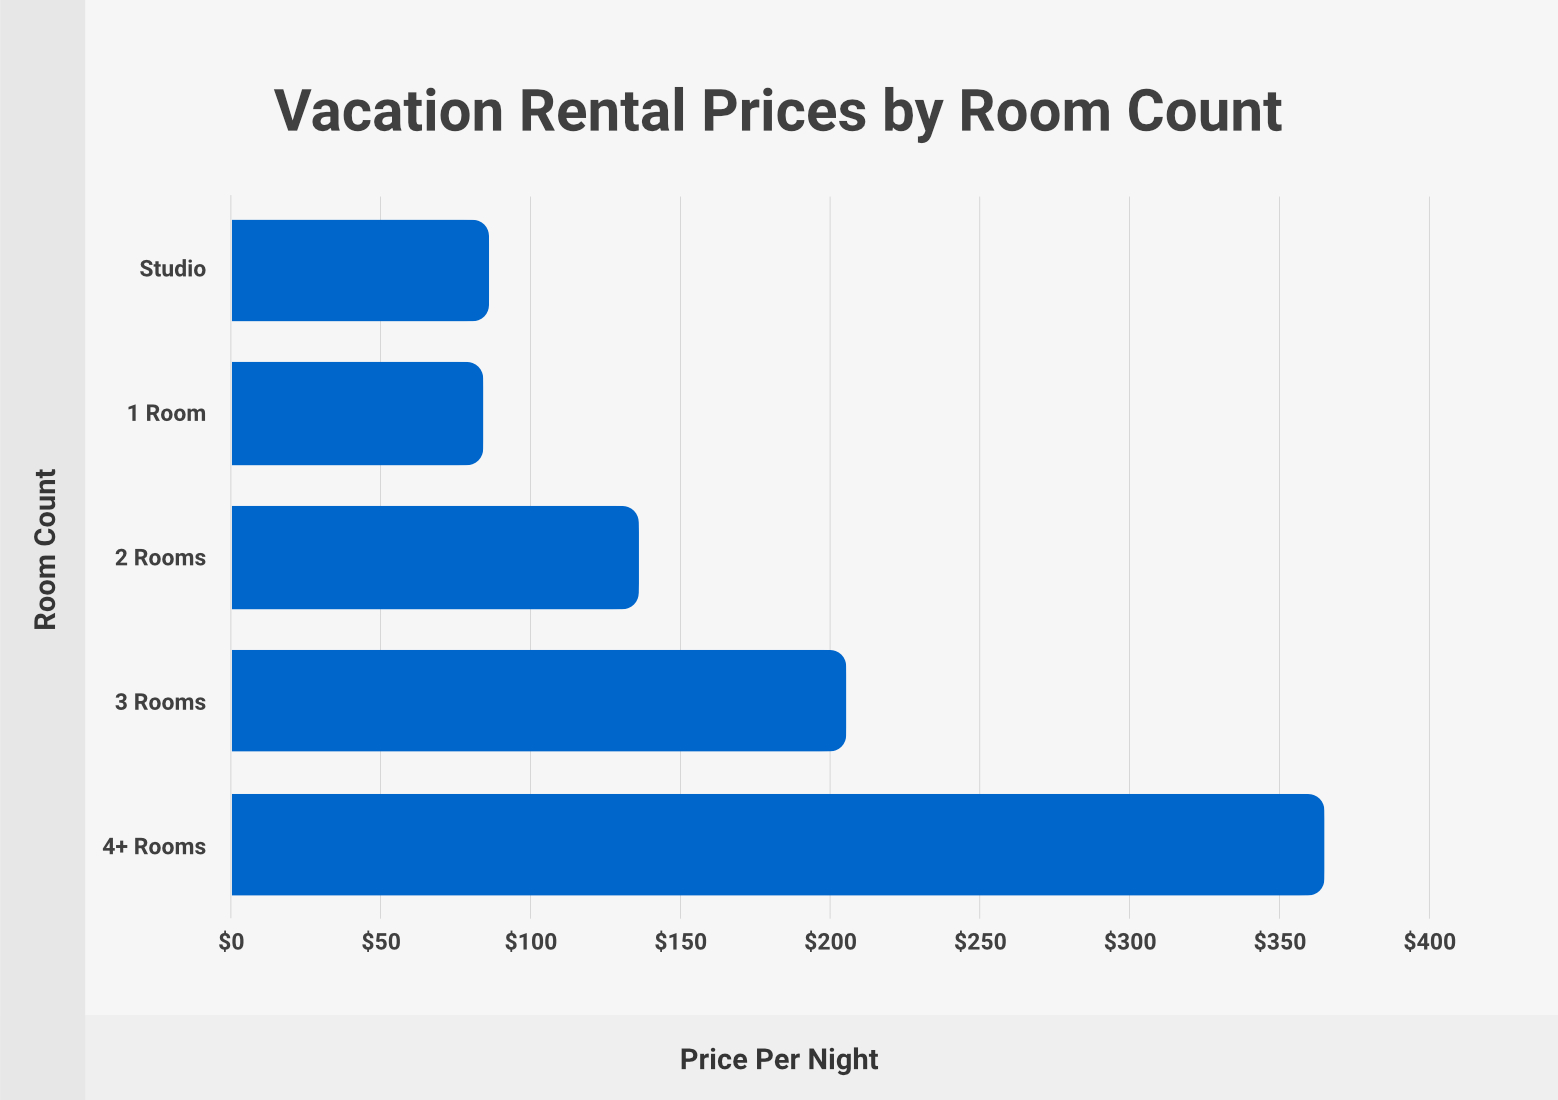 Vacation Rental Prices by Room Count